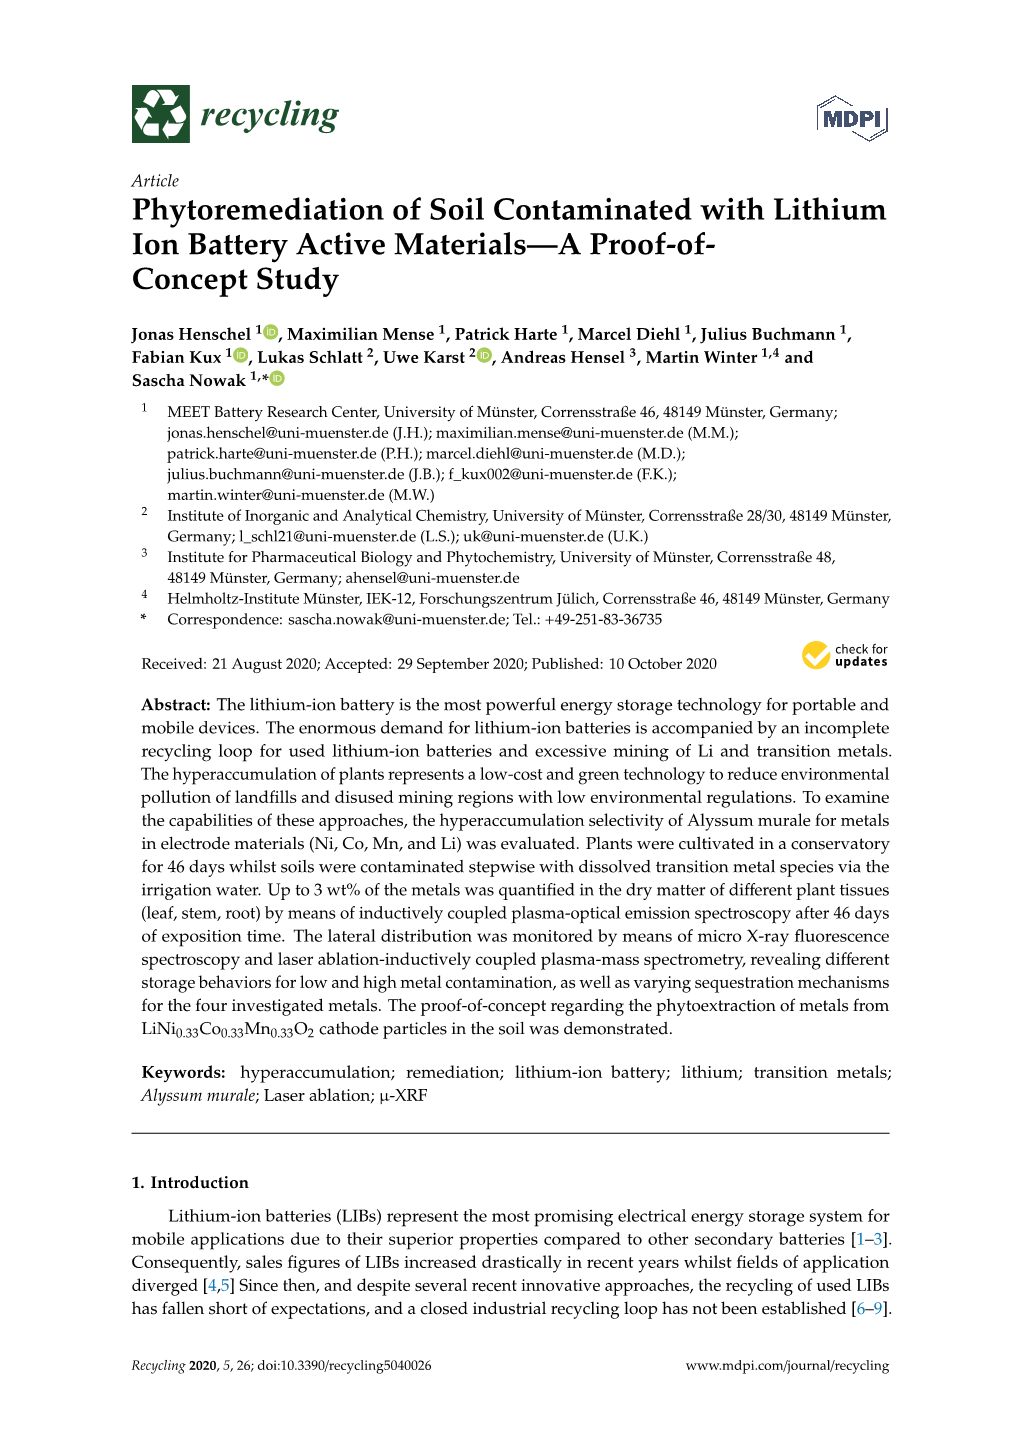 Phytoremediation of Soil Contaminated with Lithium Ion Battery Active Materials—A Proof-Of- Concept Study